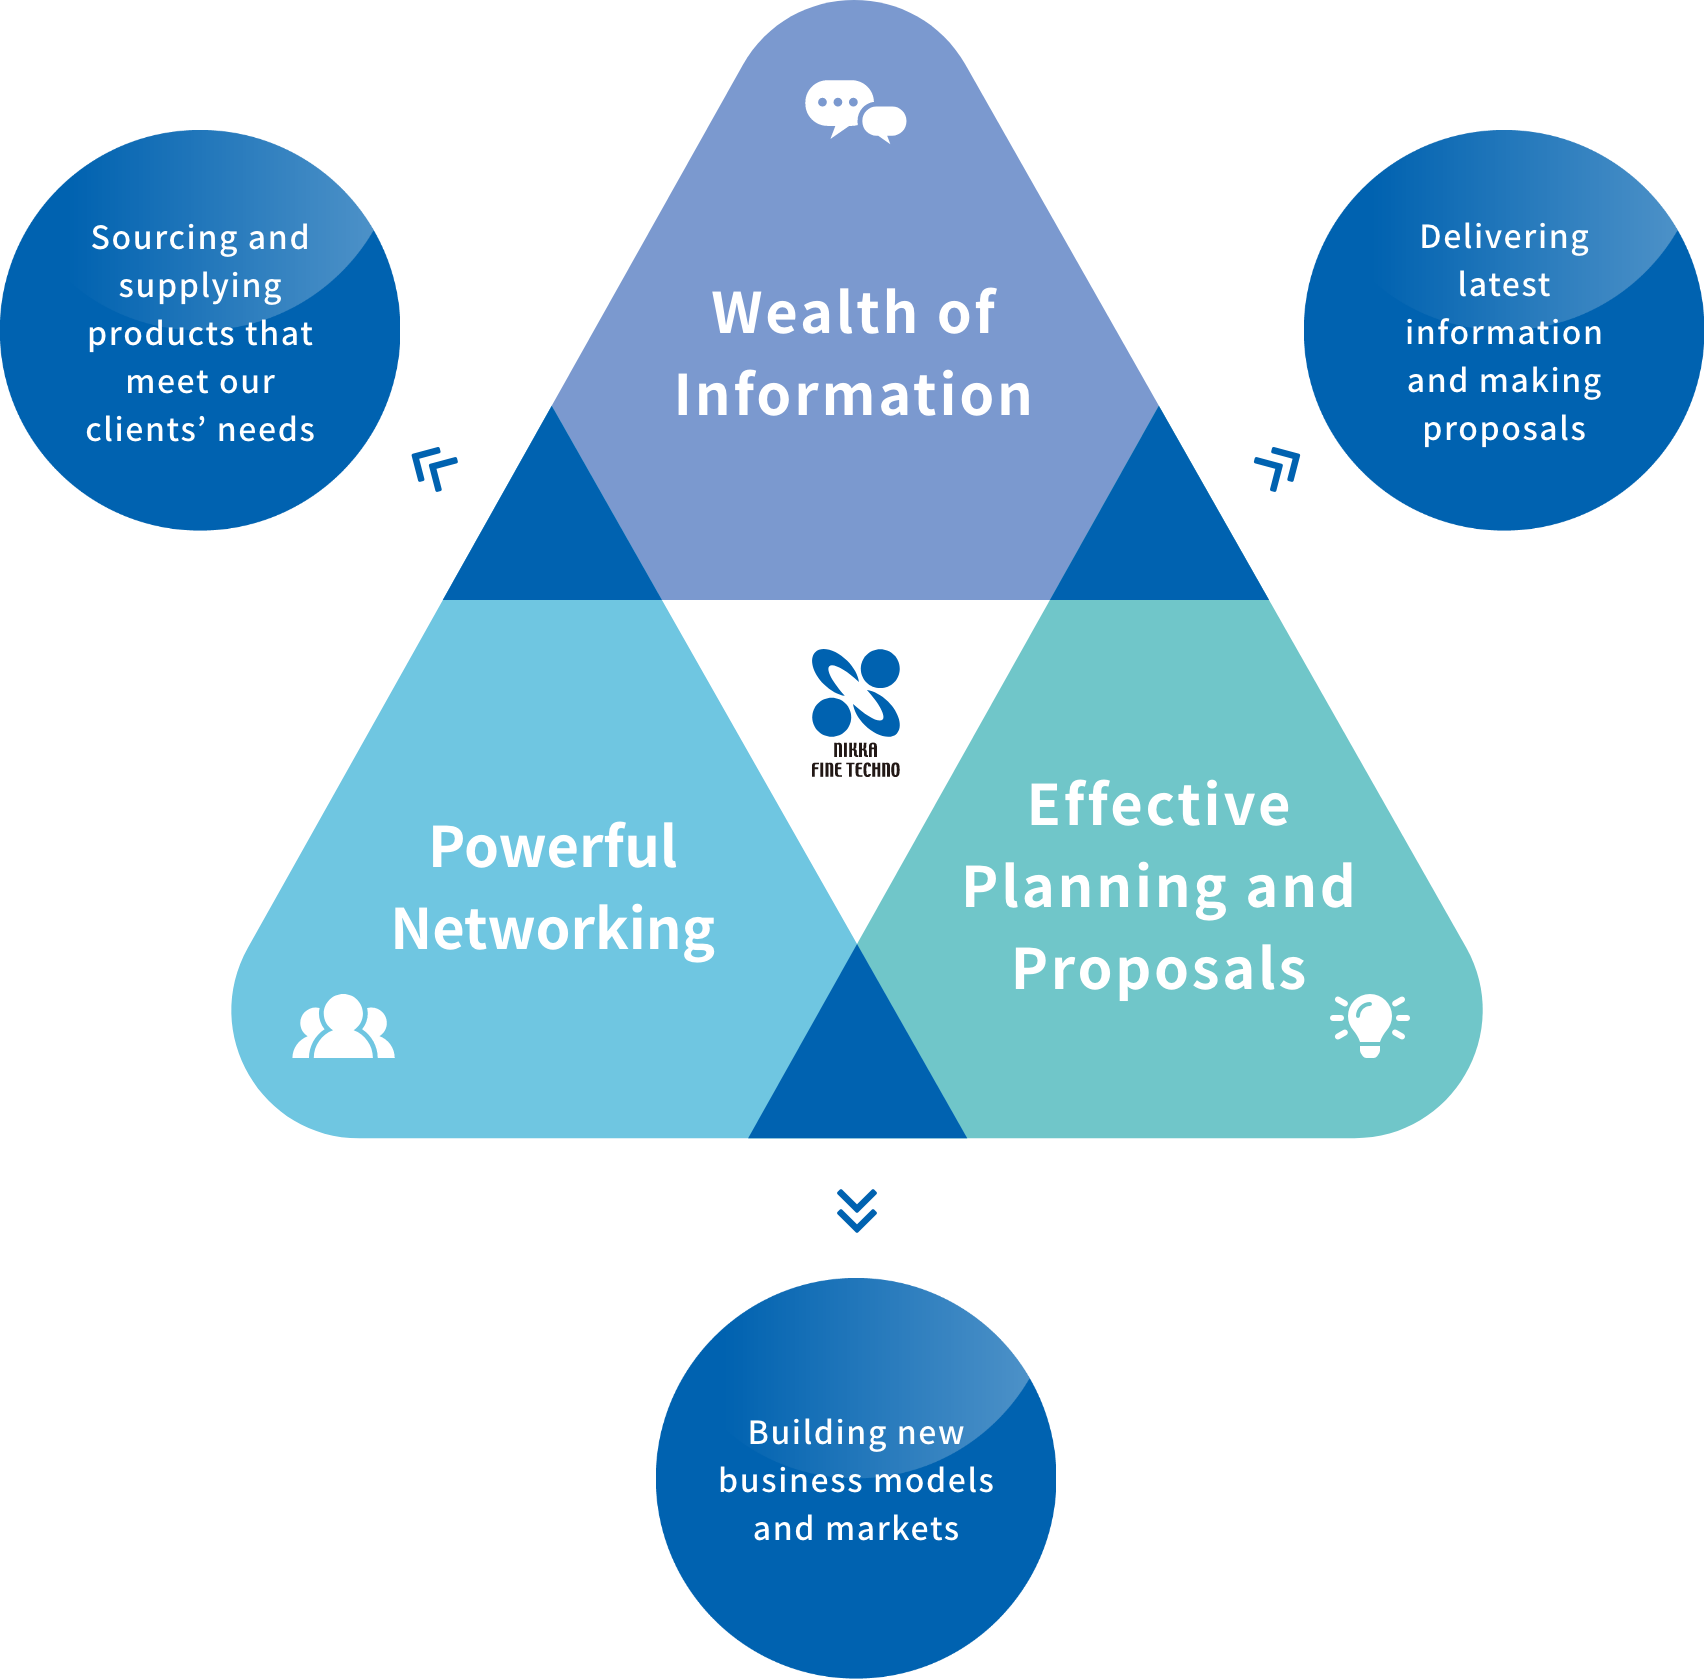 「Wealth of Information」「Effective Planning and Proposals」「Powerful Networking」